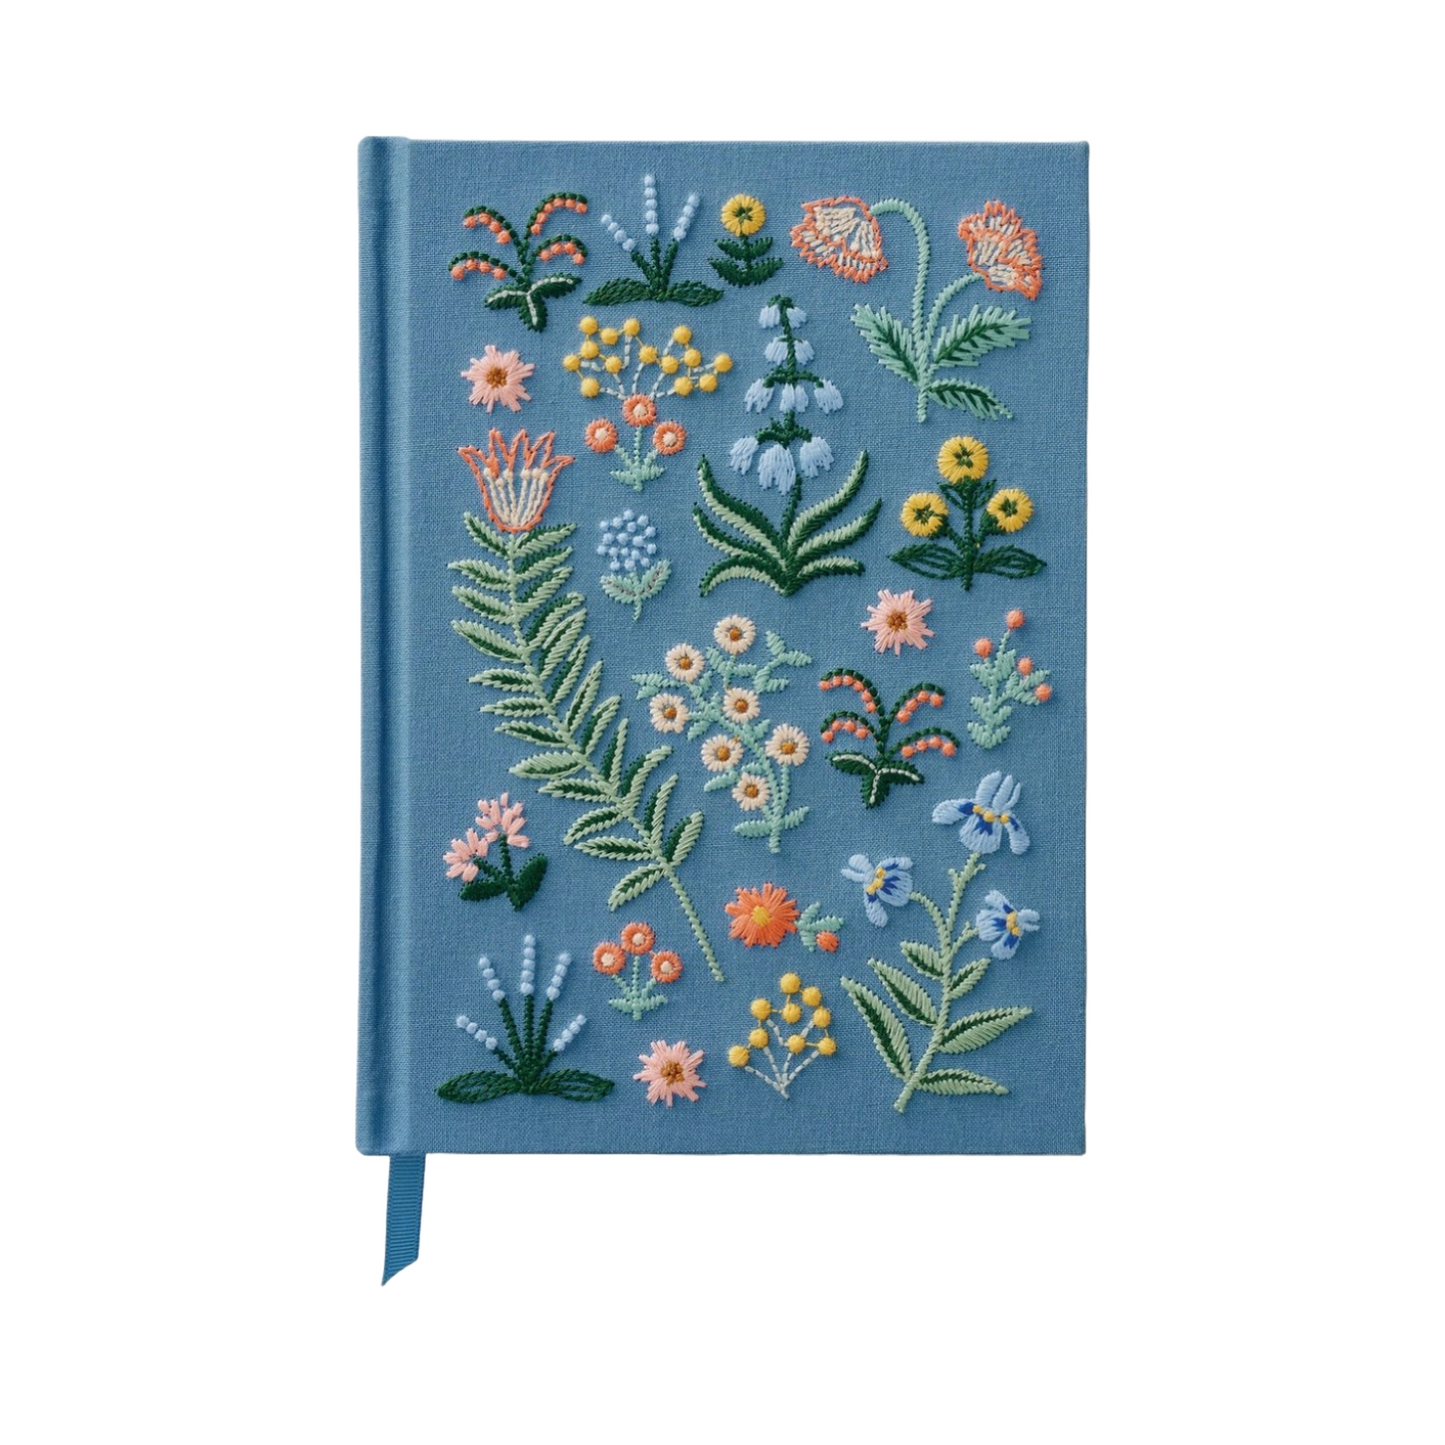 Menagerie Garden Embroidered Journal by Rifle Paper Co. 